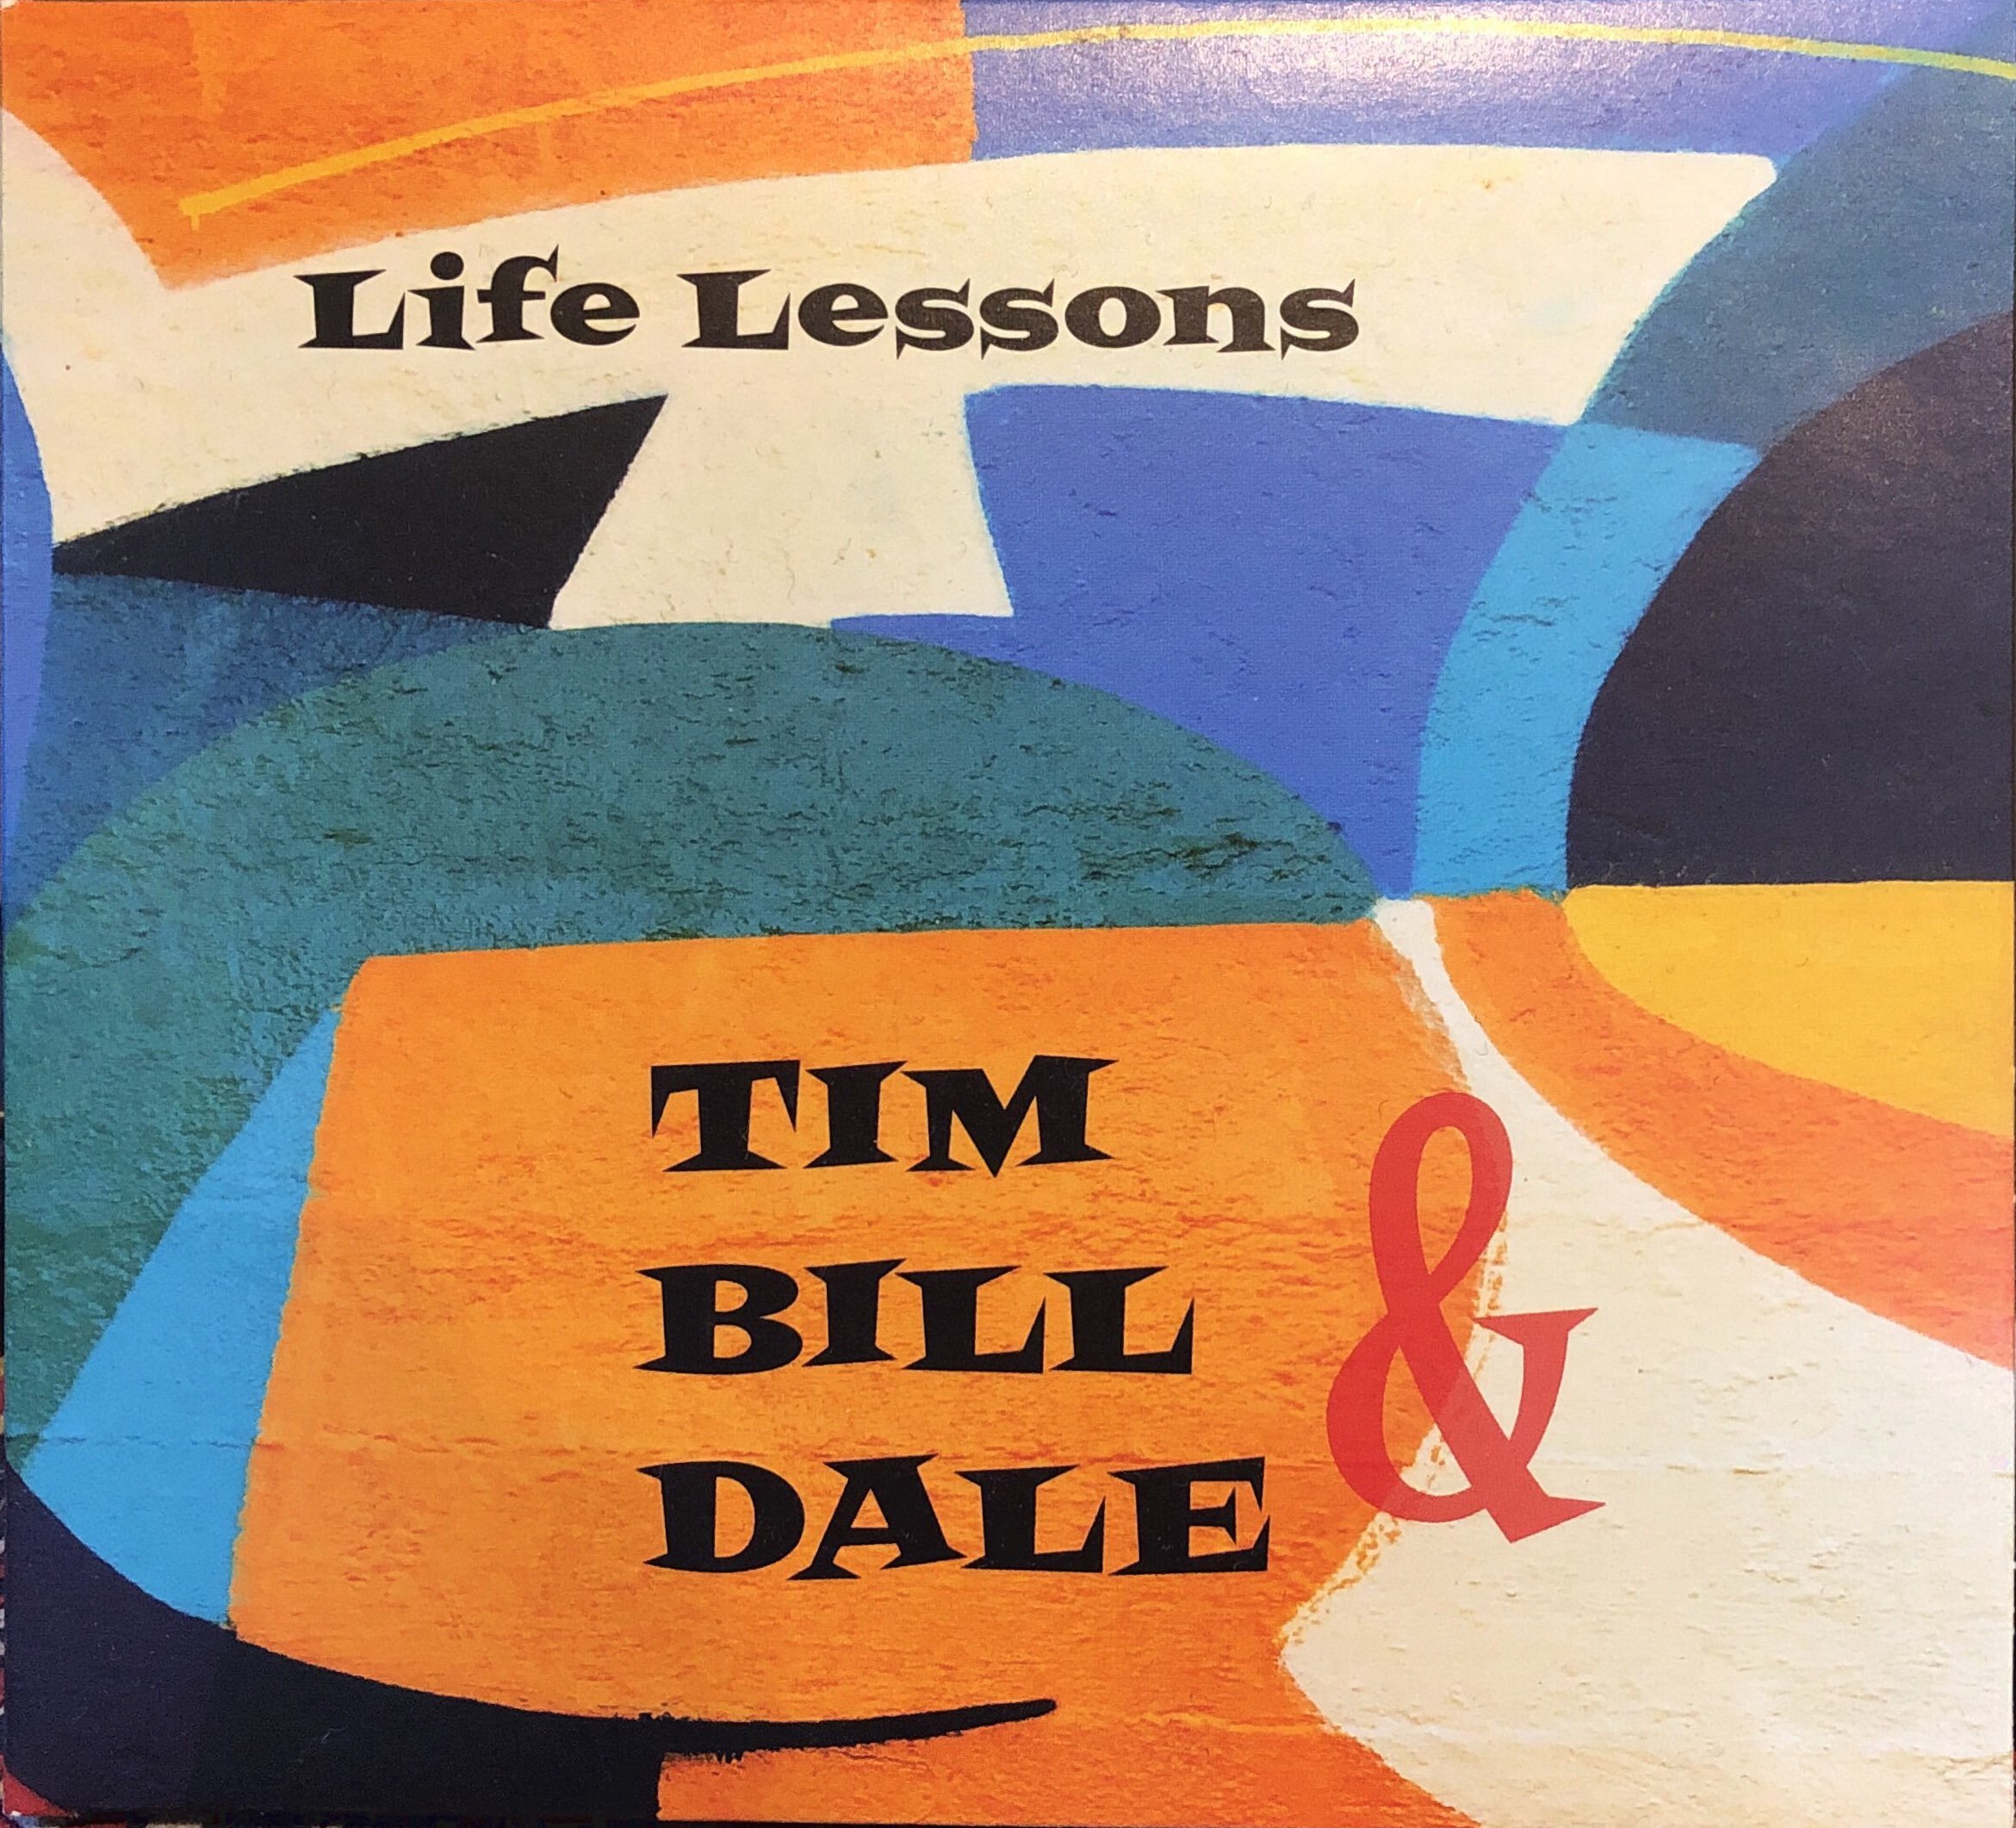 Tim O'Brien, Bill Frisell, & Dale Bruning - Life Lessons